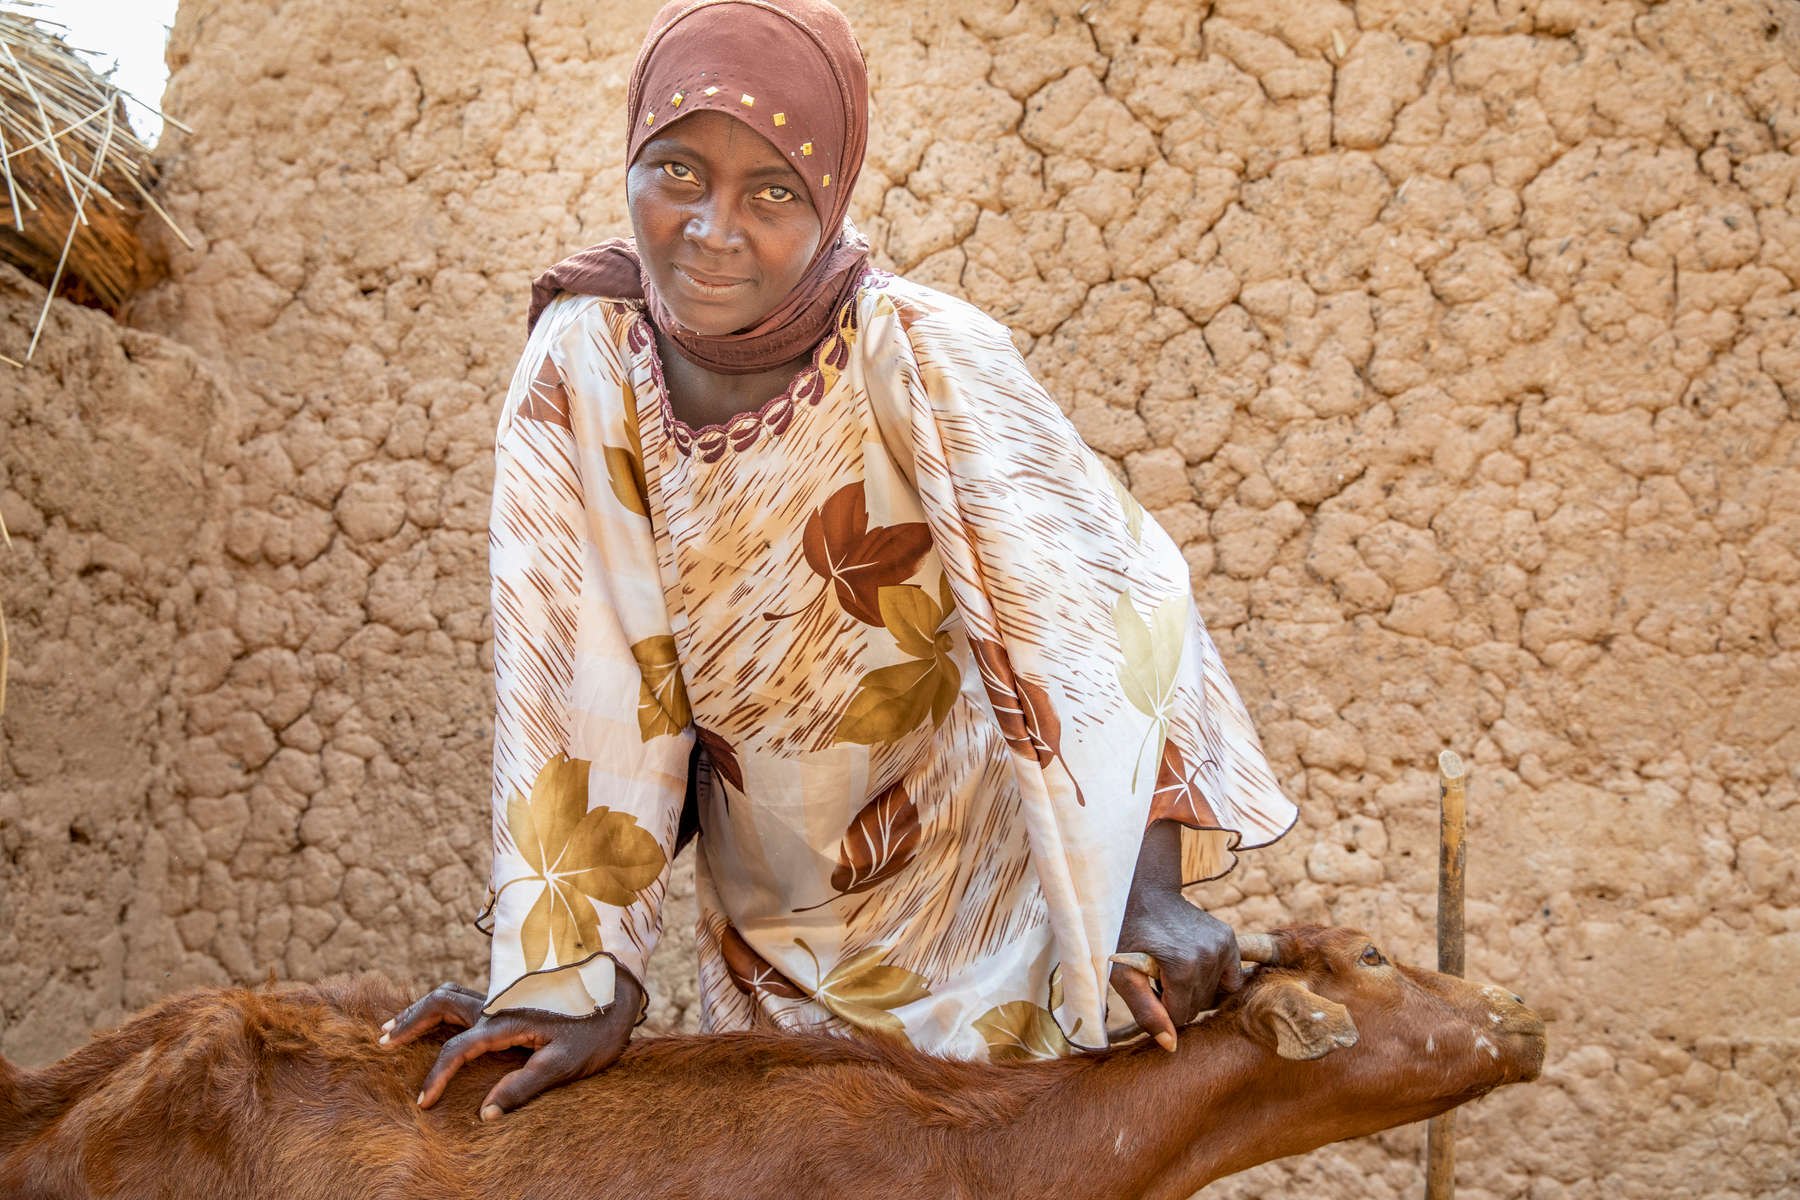 Hadiara, 35, feeds her goats. She and her family live in a small, rural village 90 minutes outside Niamey where families rely heavily on agriculture and nearly everyone lives hand-to-mouth. Food shortages are chronic here, even more so in recent years as the rains have become increasingly less reliable. Like the other women in her community, Hadiara’s days are made of manual labor: cleaning, collecting water and firewood, farming and pounding millet, with the completion of one meal time bleeding into the preparation for the next. “A woman’s life conditions are a question of a lot of struggling to have food and improve our life,” she says. “We work very hard with poor results, and our life is very difficult.”Between 2014 and 2016, Mercy Corps’ ECOUT program was implemented here, providing Hadiara’s family with seeds; cash-for-work to restore farmland; goats; and training on agriculture, nutrition and hygiene. While conditions remain harsh and hunger is still a daily struggle, the family is still seeing some of the benefits from that program: the goat allowed Hadiara to feed her newborn baby when she couldn’t produce breastmilk, and today the animals are healthy — and pregnant, which will provide her with an emergency source of income. “I am taking care of them myself,” Hadiara says of her goats. “They are very precious to me.” 